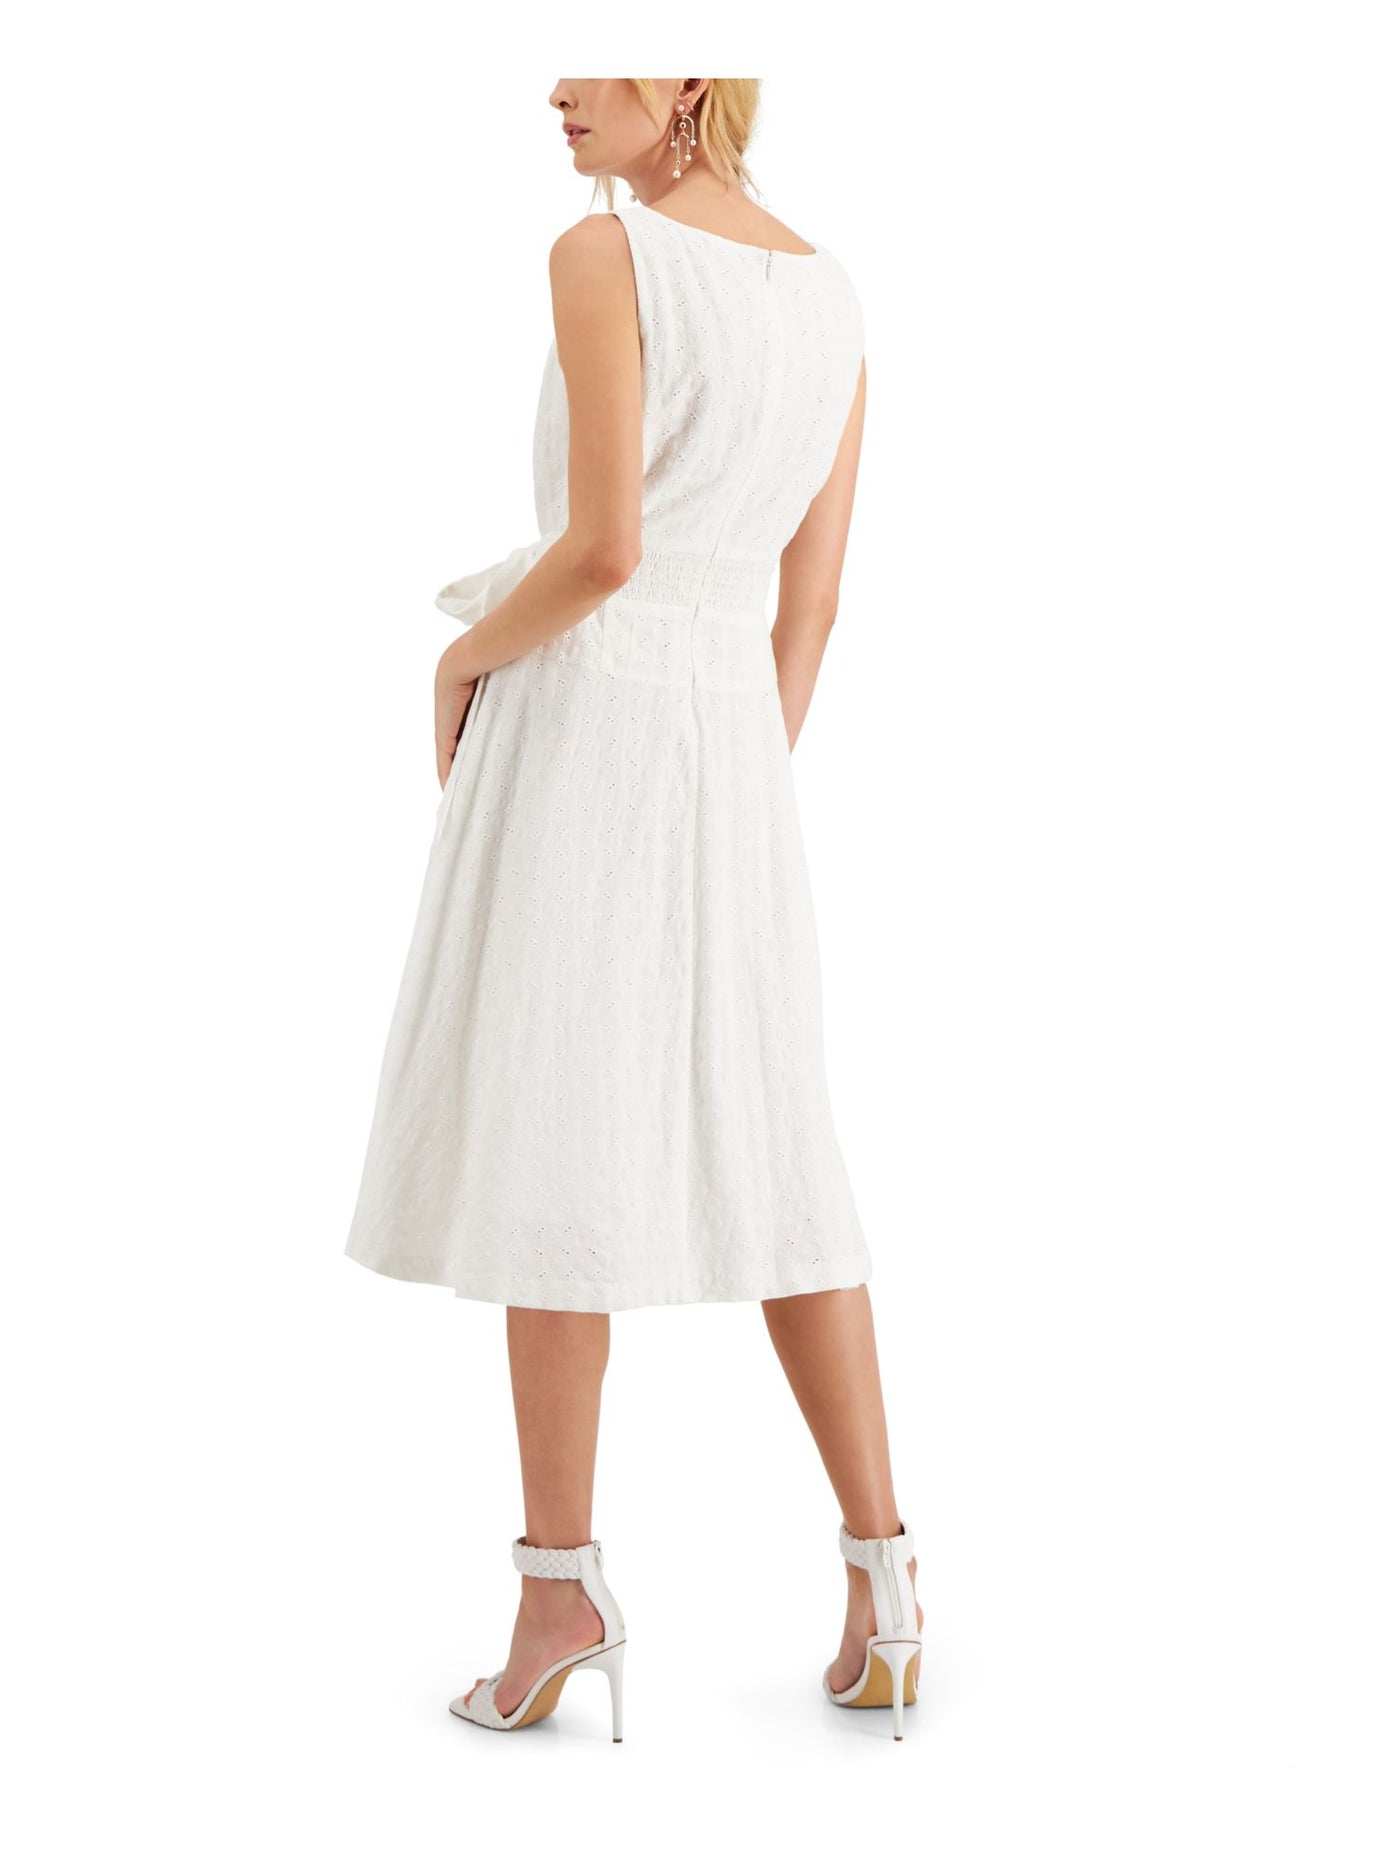 TAYLOR Womens White Zippered Eyelet Tie Belt Lined Smocked Sleeveless V Neck Below The Knee Fit + Flare Dress Petites 2P